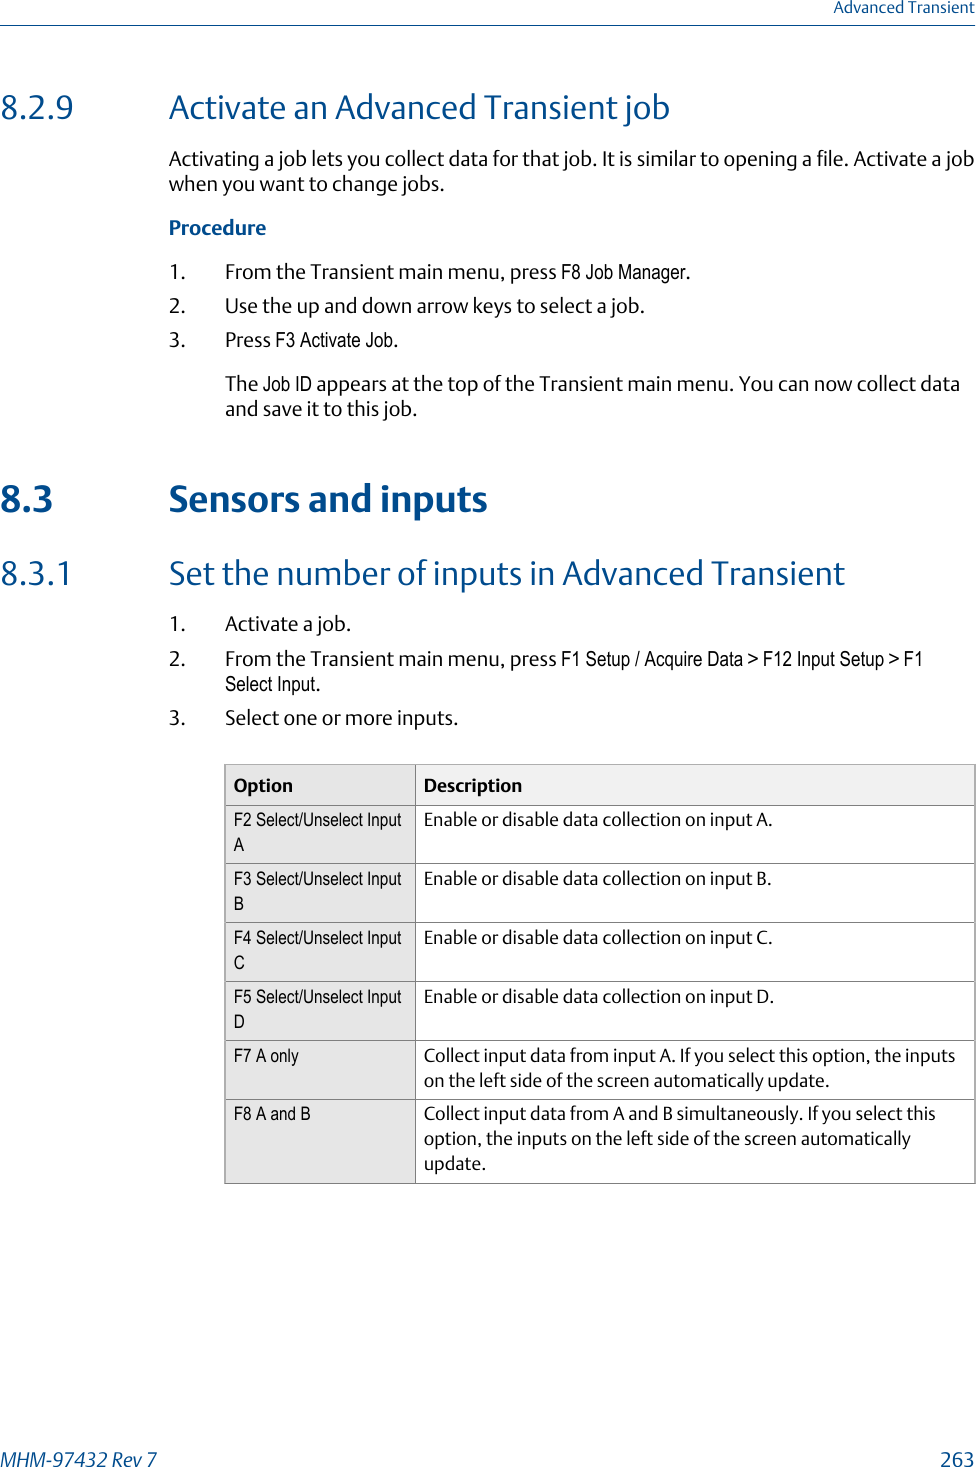 8.2.9 Activate an Advanced Transient jobActivating a job lets you collect data for that job. It is similar to opening a file. Activate a jobwhen you want to change jobs.Procedure1. From the Transient main menu, press F8 Job Manager.2. Use the up and down arrow keys to select a job.3. Press F3 Activate Job.The Job ID appears at the top of the Transient main menu. You can now collect dataand save it to this job.8.3 Sensors and inputs8.3.1 Set the number of inputs in Advanced Transient1. Activate a job.2. From the Transient main menu, press F1 Setup / Acquire Data &gt; F12 Input Setup &gt; F1Select Input.3. Select one or more inputs.Option DescriptionF2 Select/Unselect InputAEnable or disable data collection on input A.F3 Select/Unselect InputBEnable or disable data collection on input B.F4 Select/Unselect InputCEnable or disable data collection on input C.F5 Select/Unselect InputDEnable or disable data collection on input D.F7 A only Collect input data from input A. If you select this option, the inputson the left side of the screen automatically update.F8 A and B Collect input data from A and B simultaneously. If you select thisoption, the inputs on the left side of the screen automaticallyupdate.Advanced TransientMHM-97432 Rev 7  263